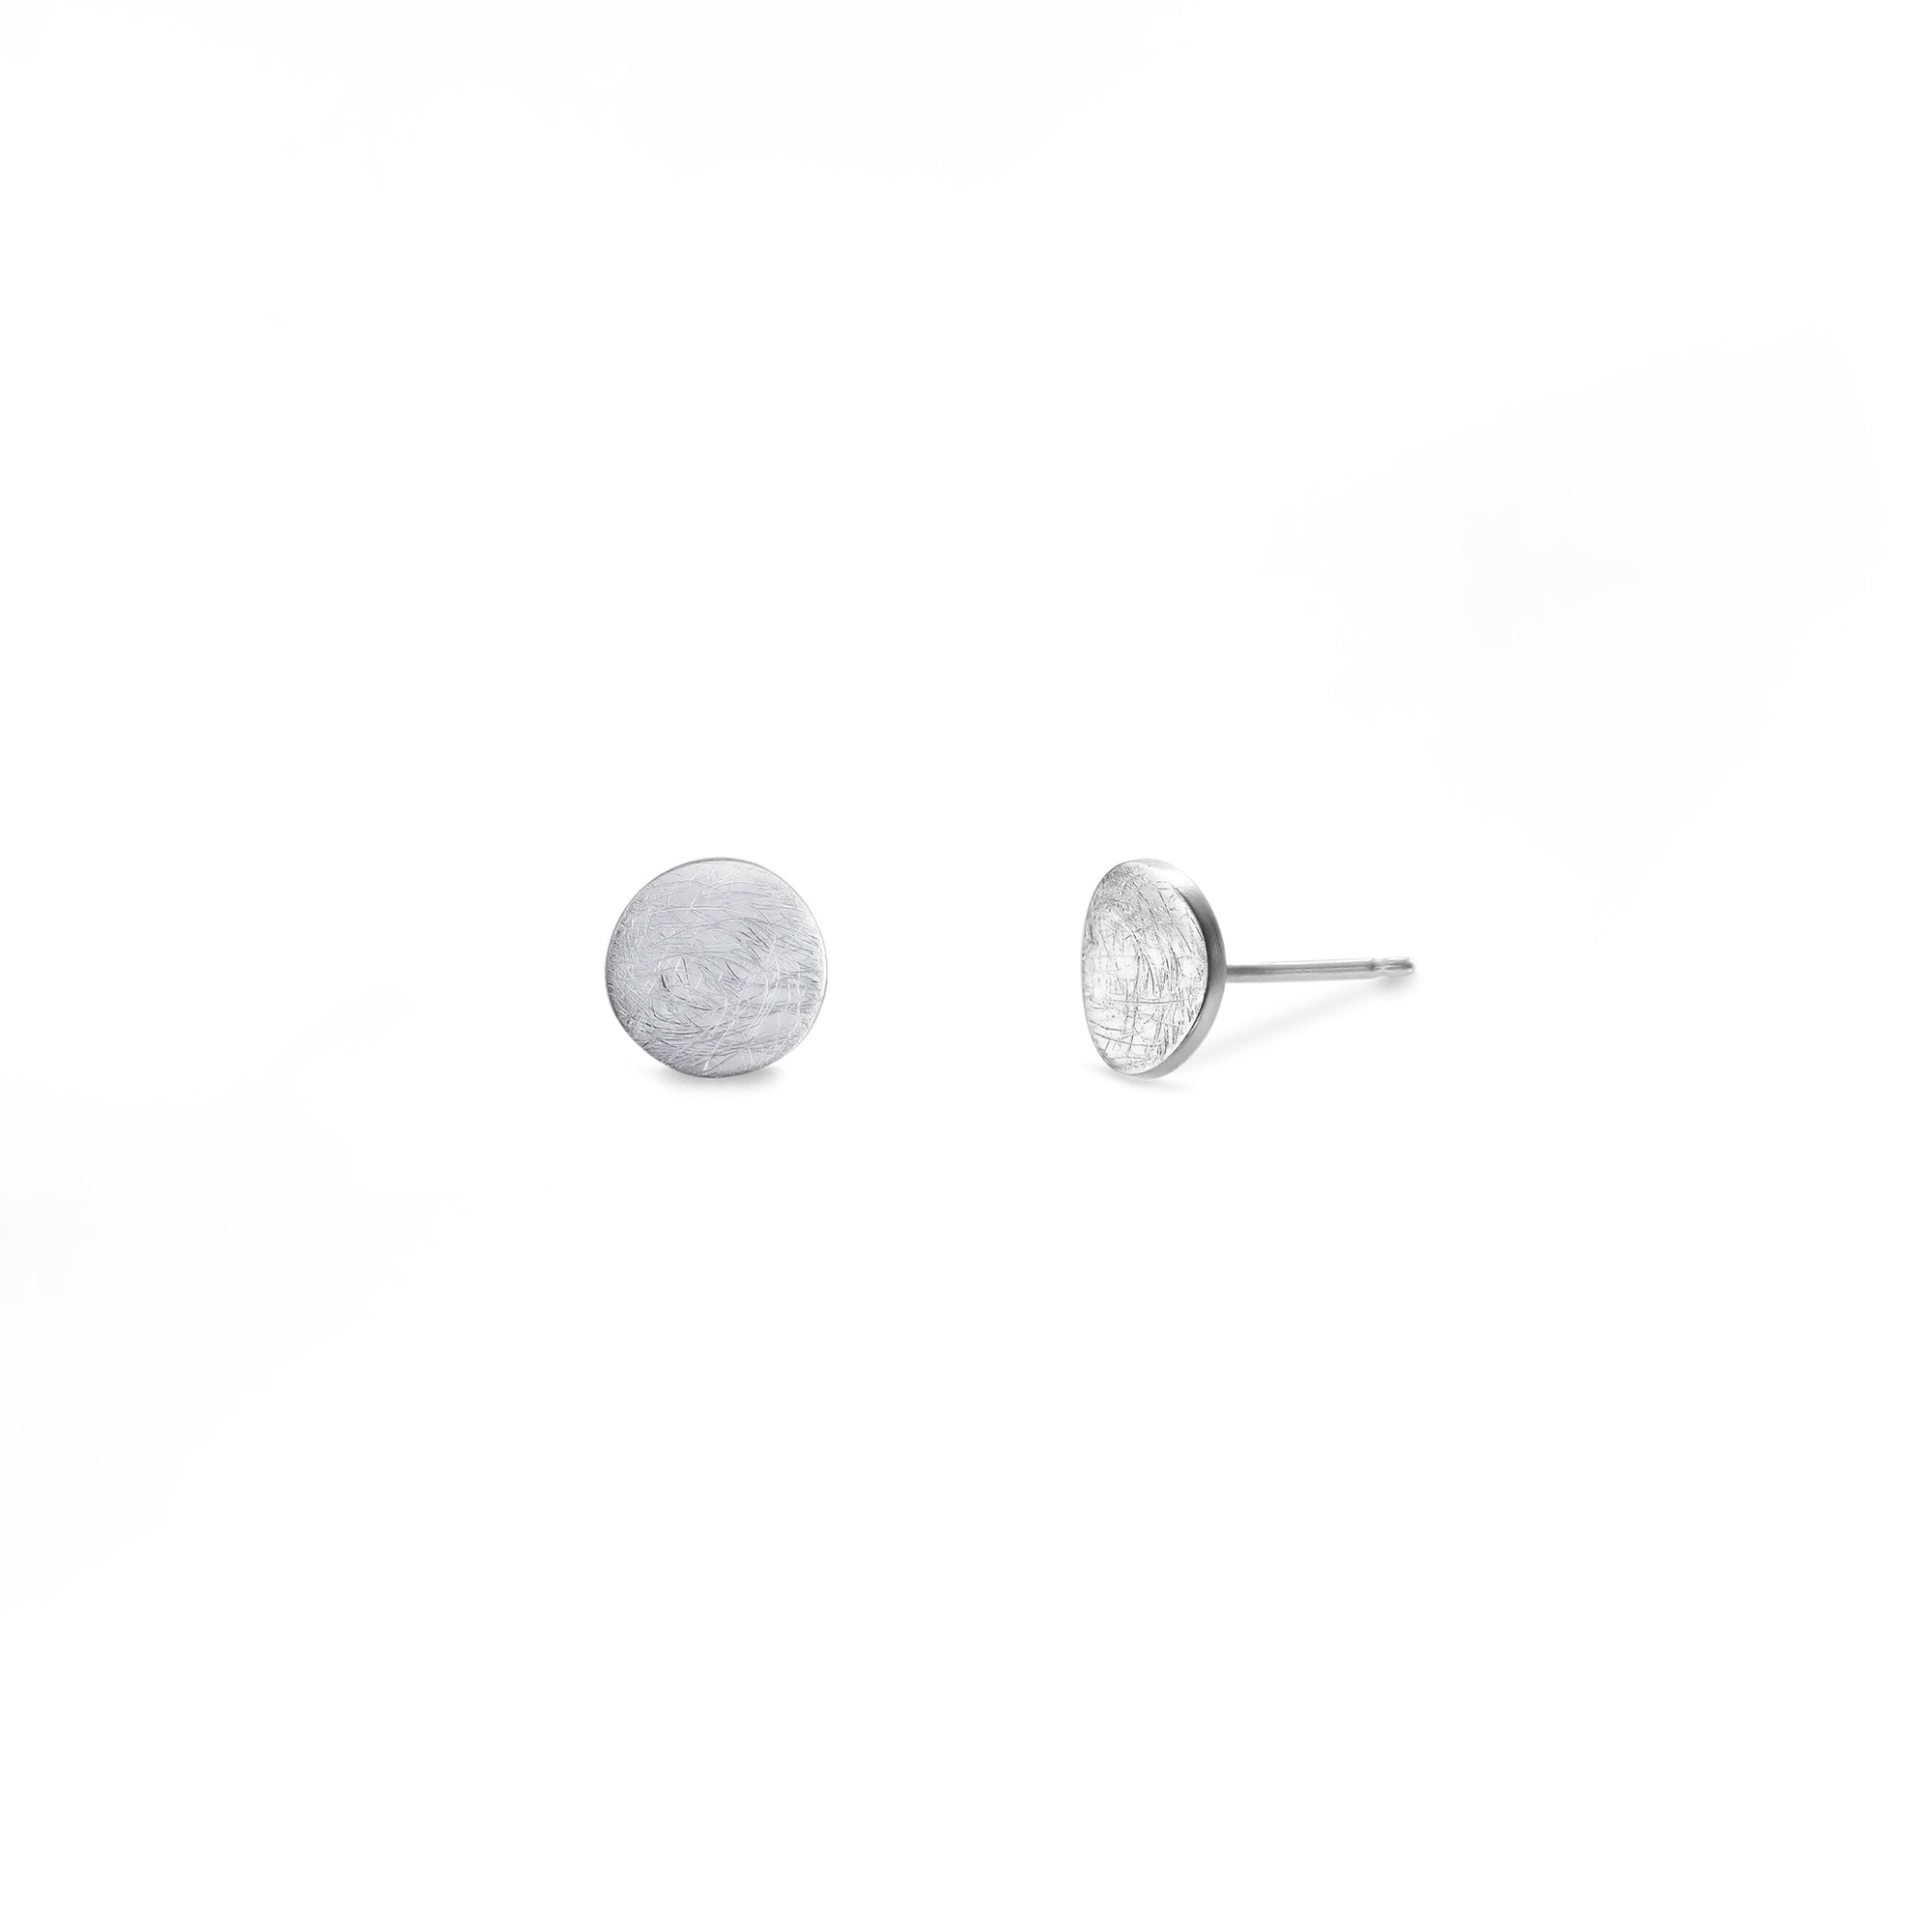 Boma Sterling Silver Post Earrings - Round Curved with Iced Finish    